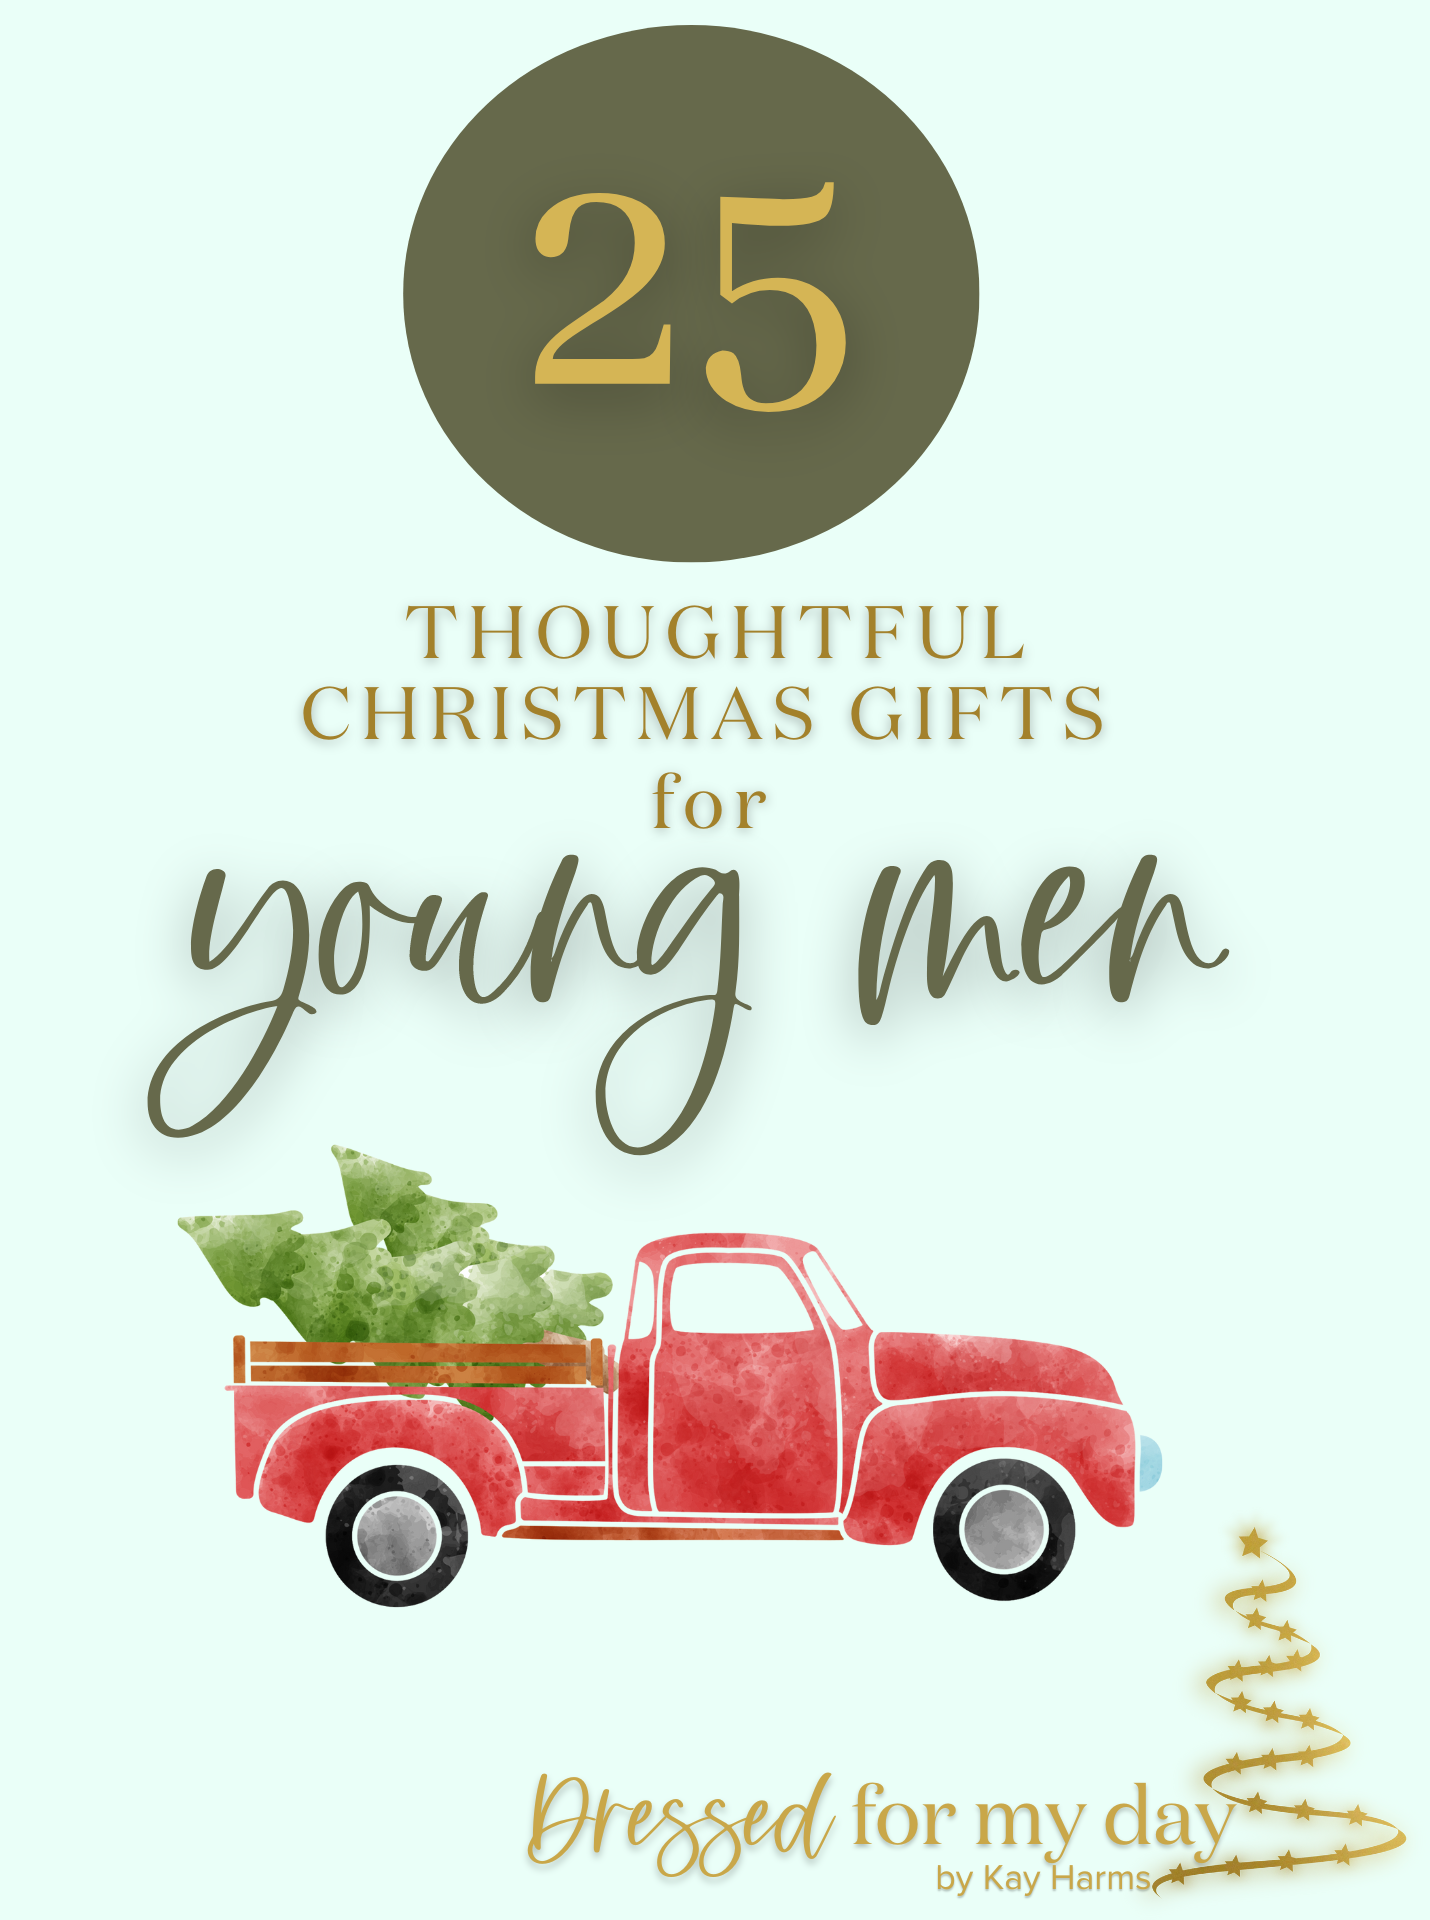 https://dressedformyday.com/wp-content/uploads/2022/11/Copy-of-50-Thoughtful-Christmas-Gifts-for-the-Active-Woman.png